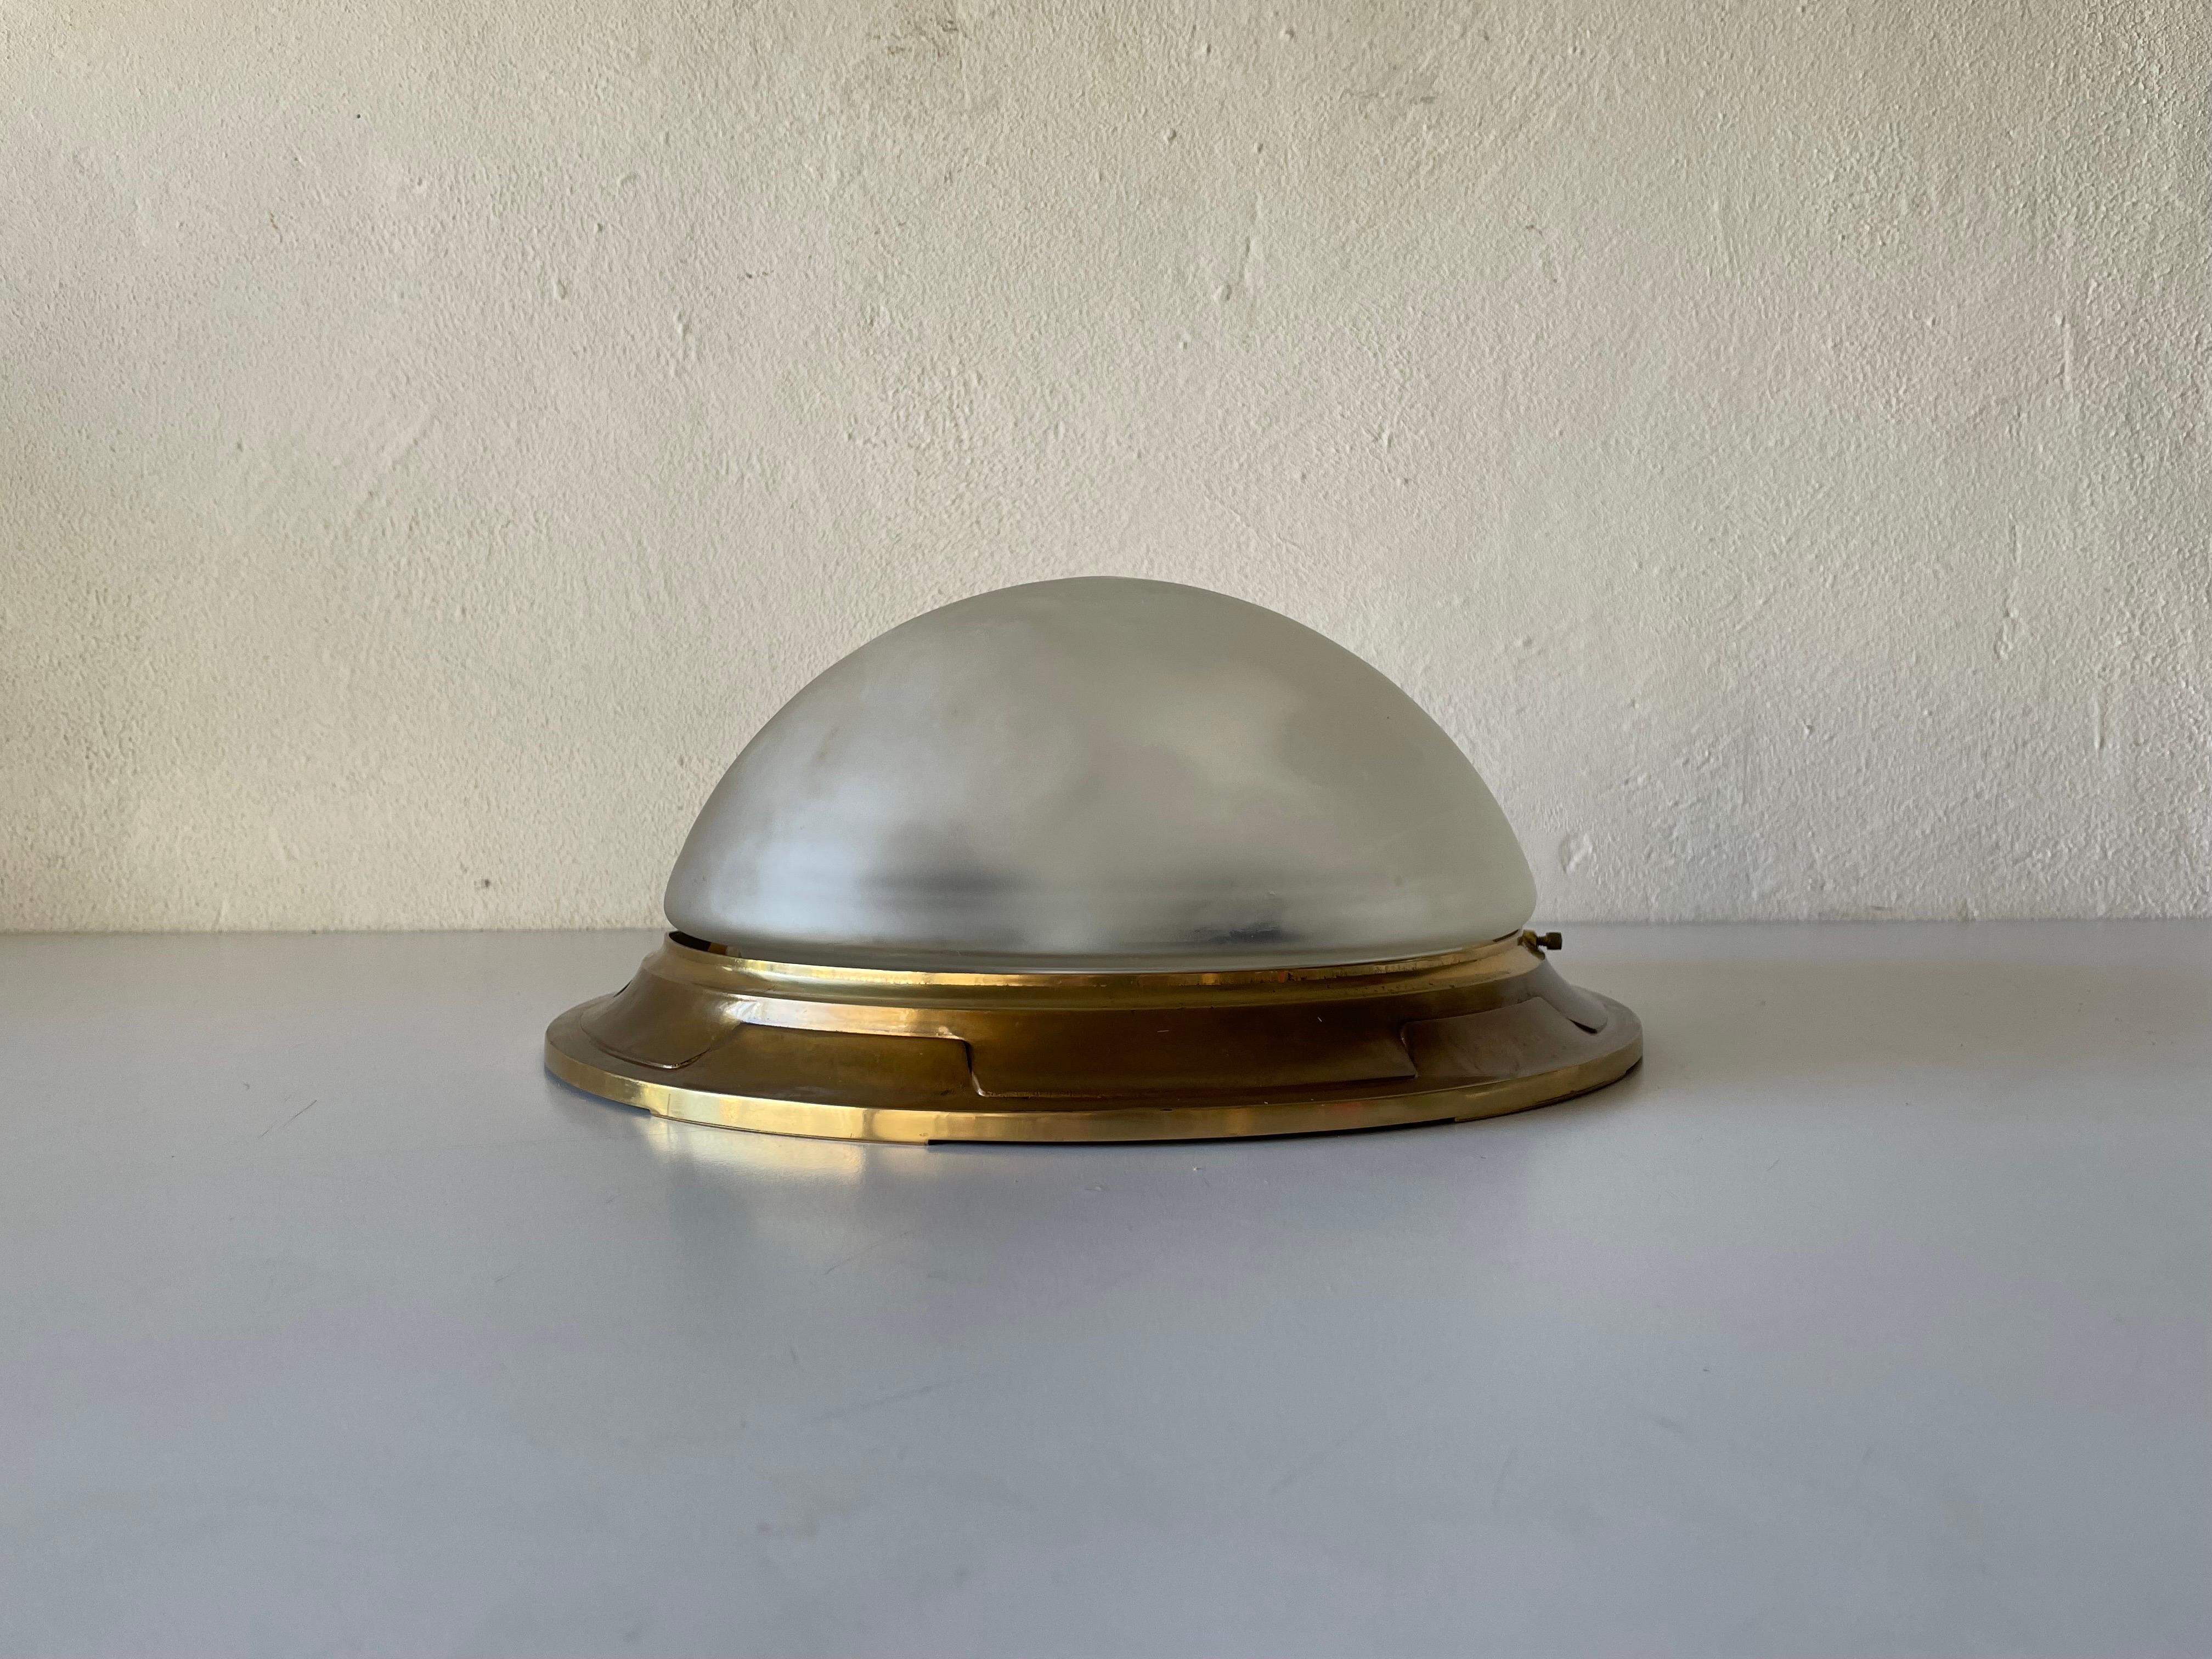 Glass & Heavy Brass Base Ceiling or Wall Lamp by Mod Dep Lamp Art, 1960s, Italy

Lampshade is in very good vintage condition.

This lamp works with 2x E27 light bulbs. 
Wired and suitable to use with 220V and 110V for all